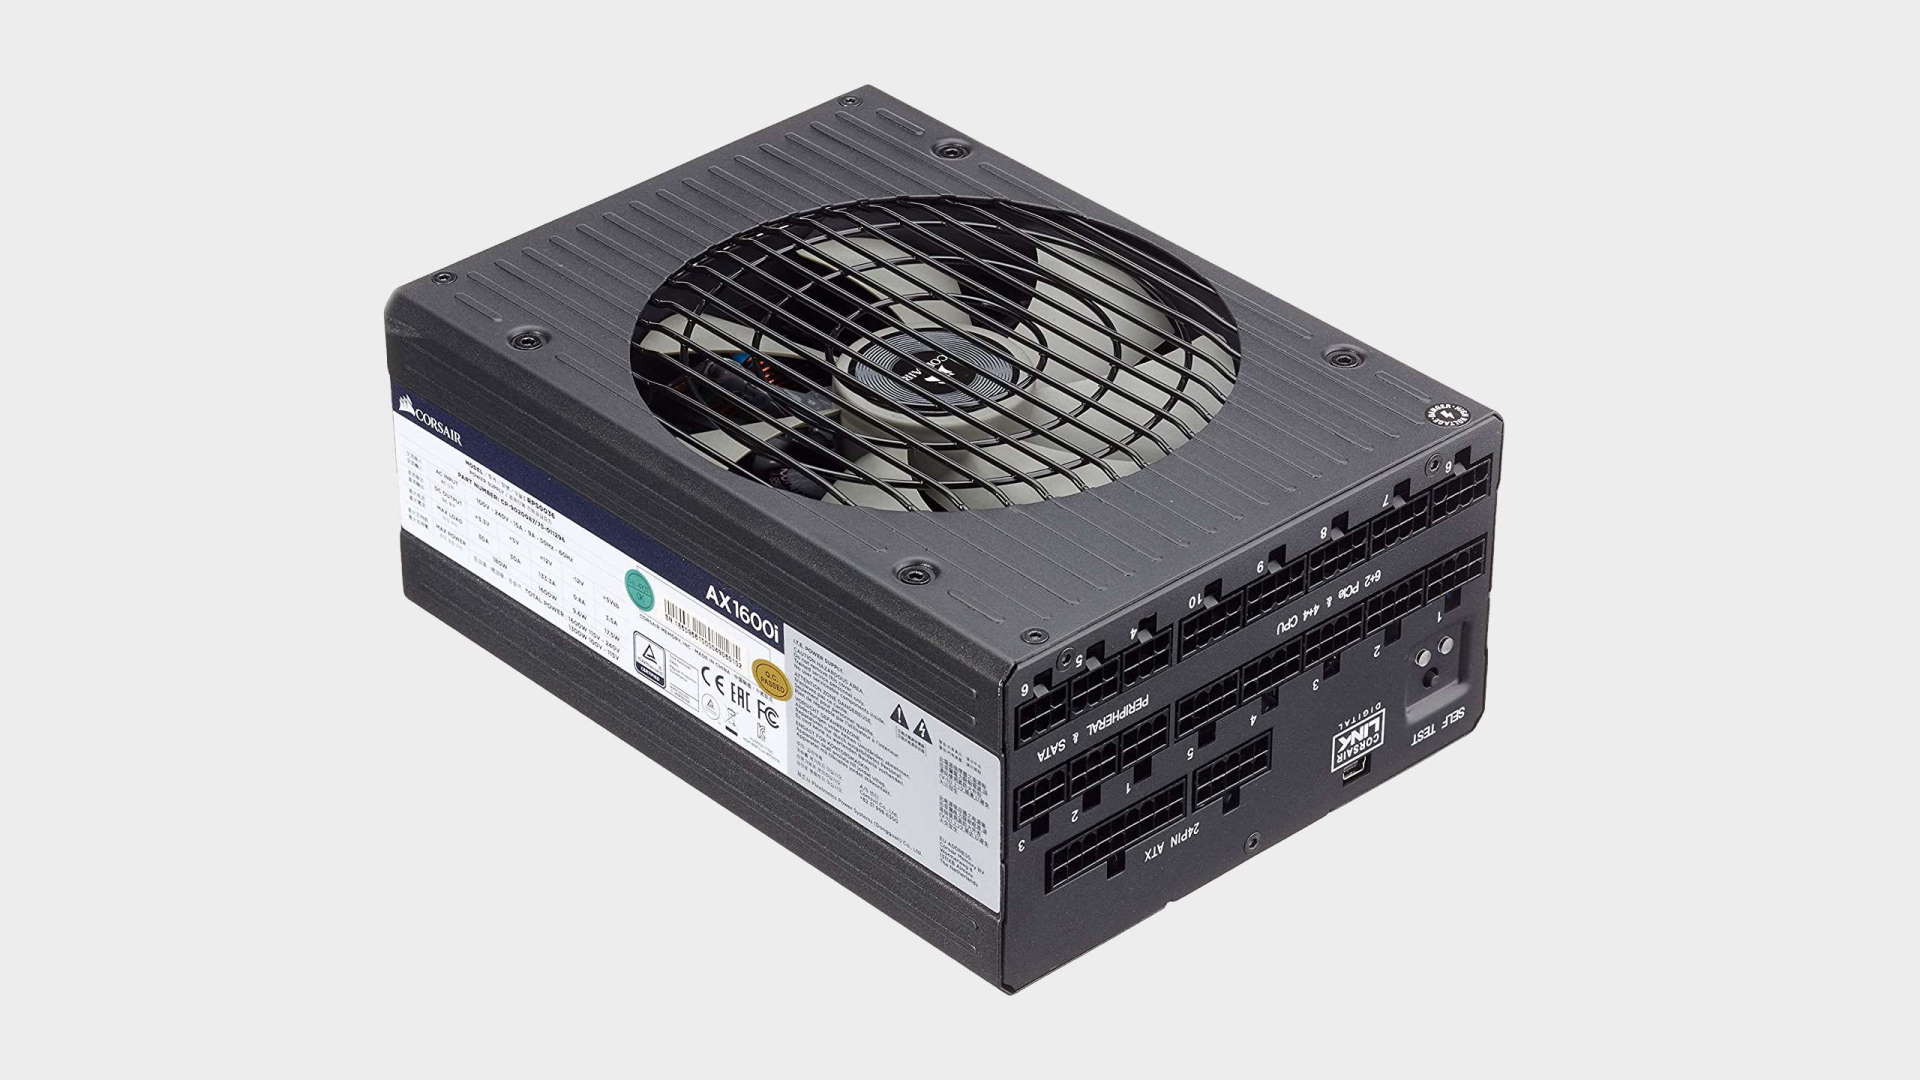 Image of the Corsair AX1600i power supply on a grey background.